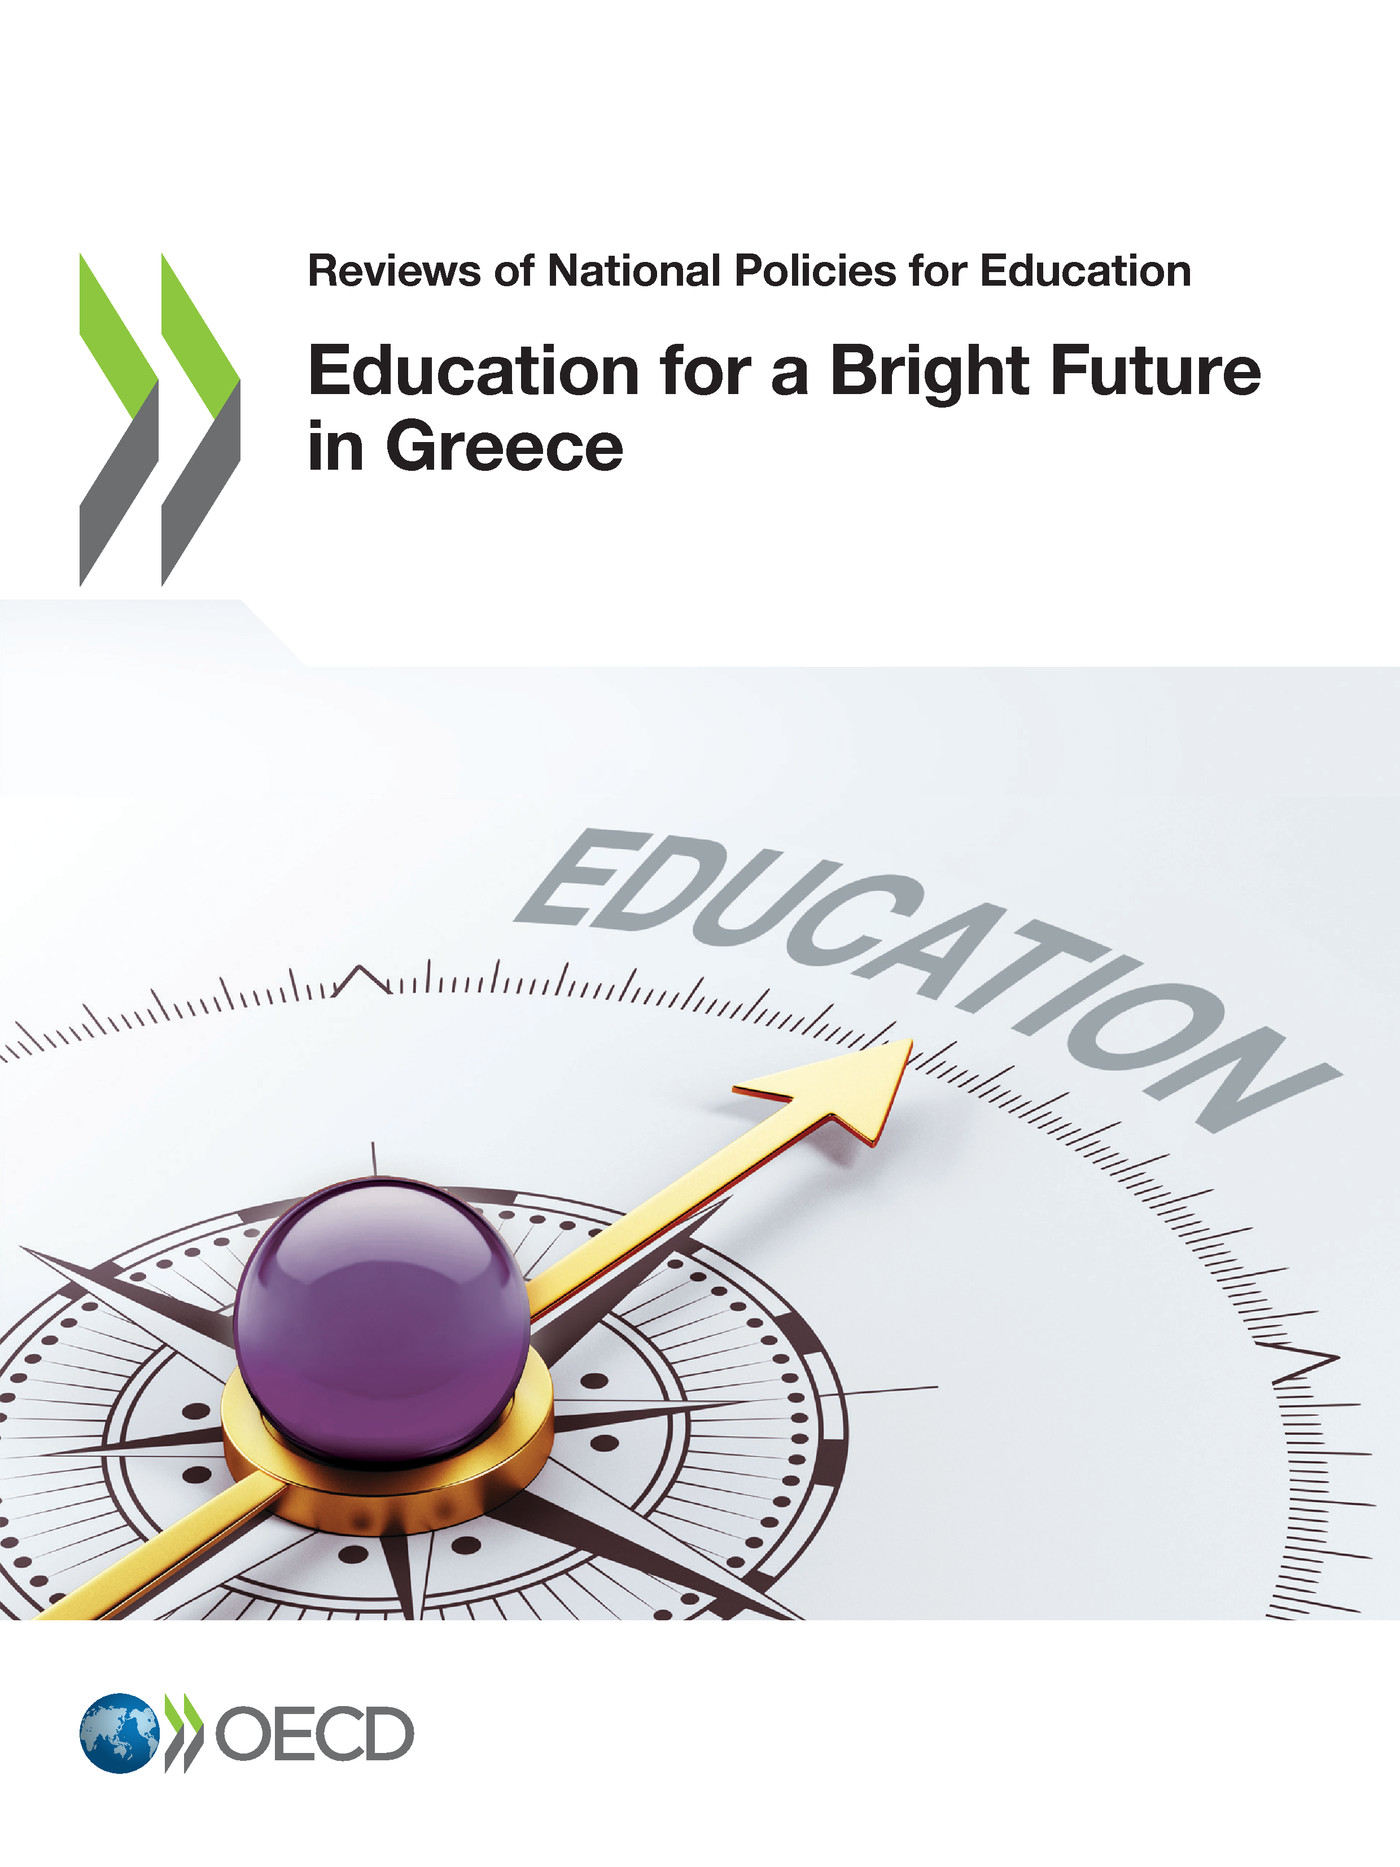 Education for a Bright Future in Greece -  Collectif - OCDE / OECD